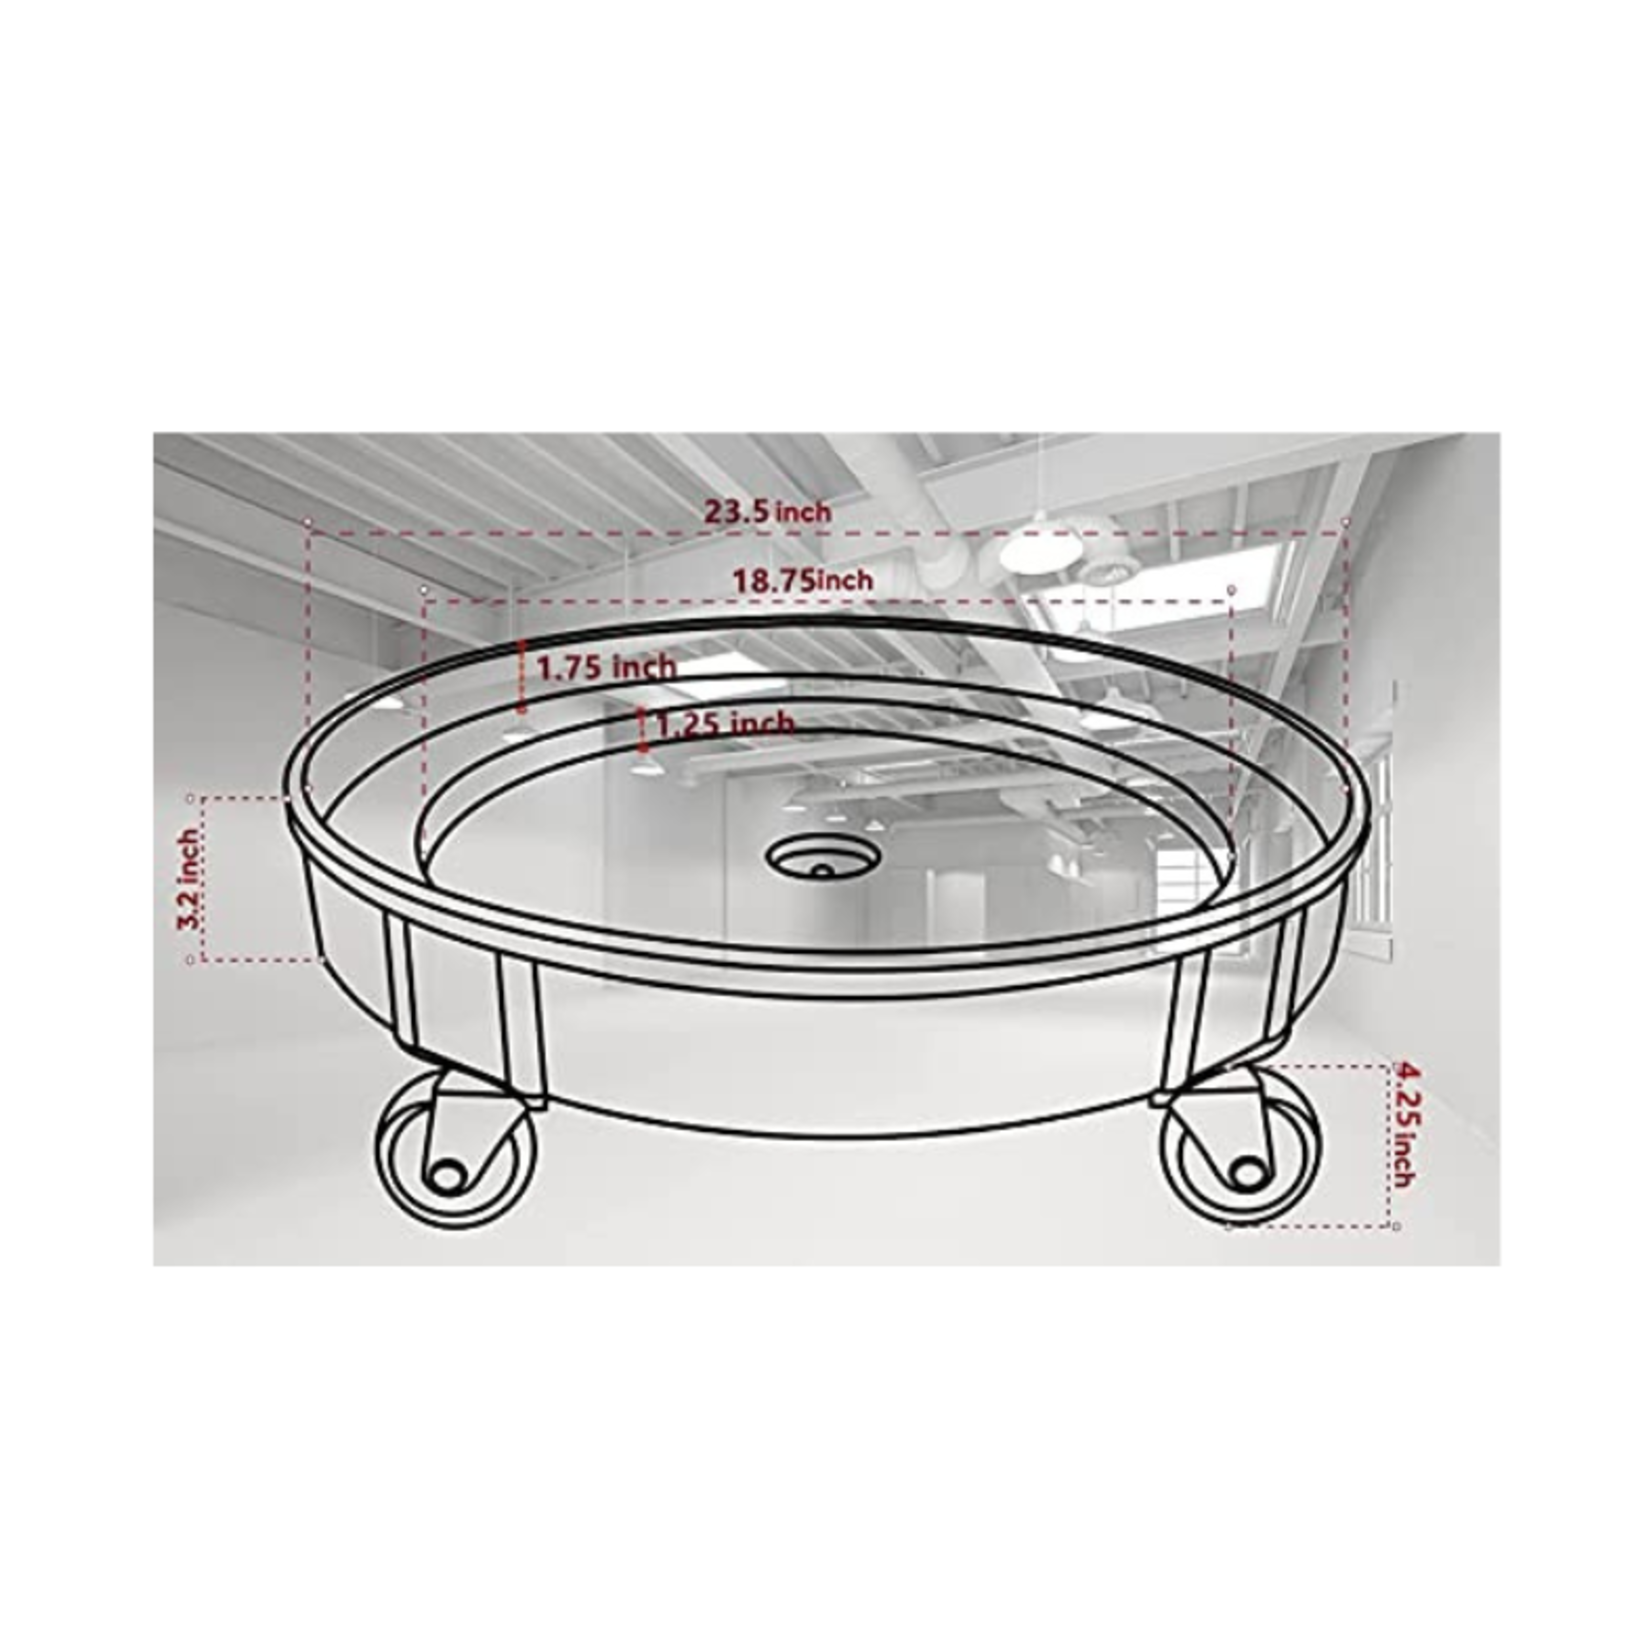 Pake Drum Dolly - 5 Swivel Casters